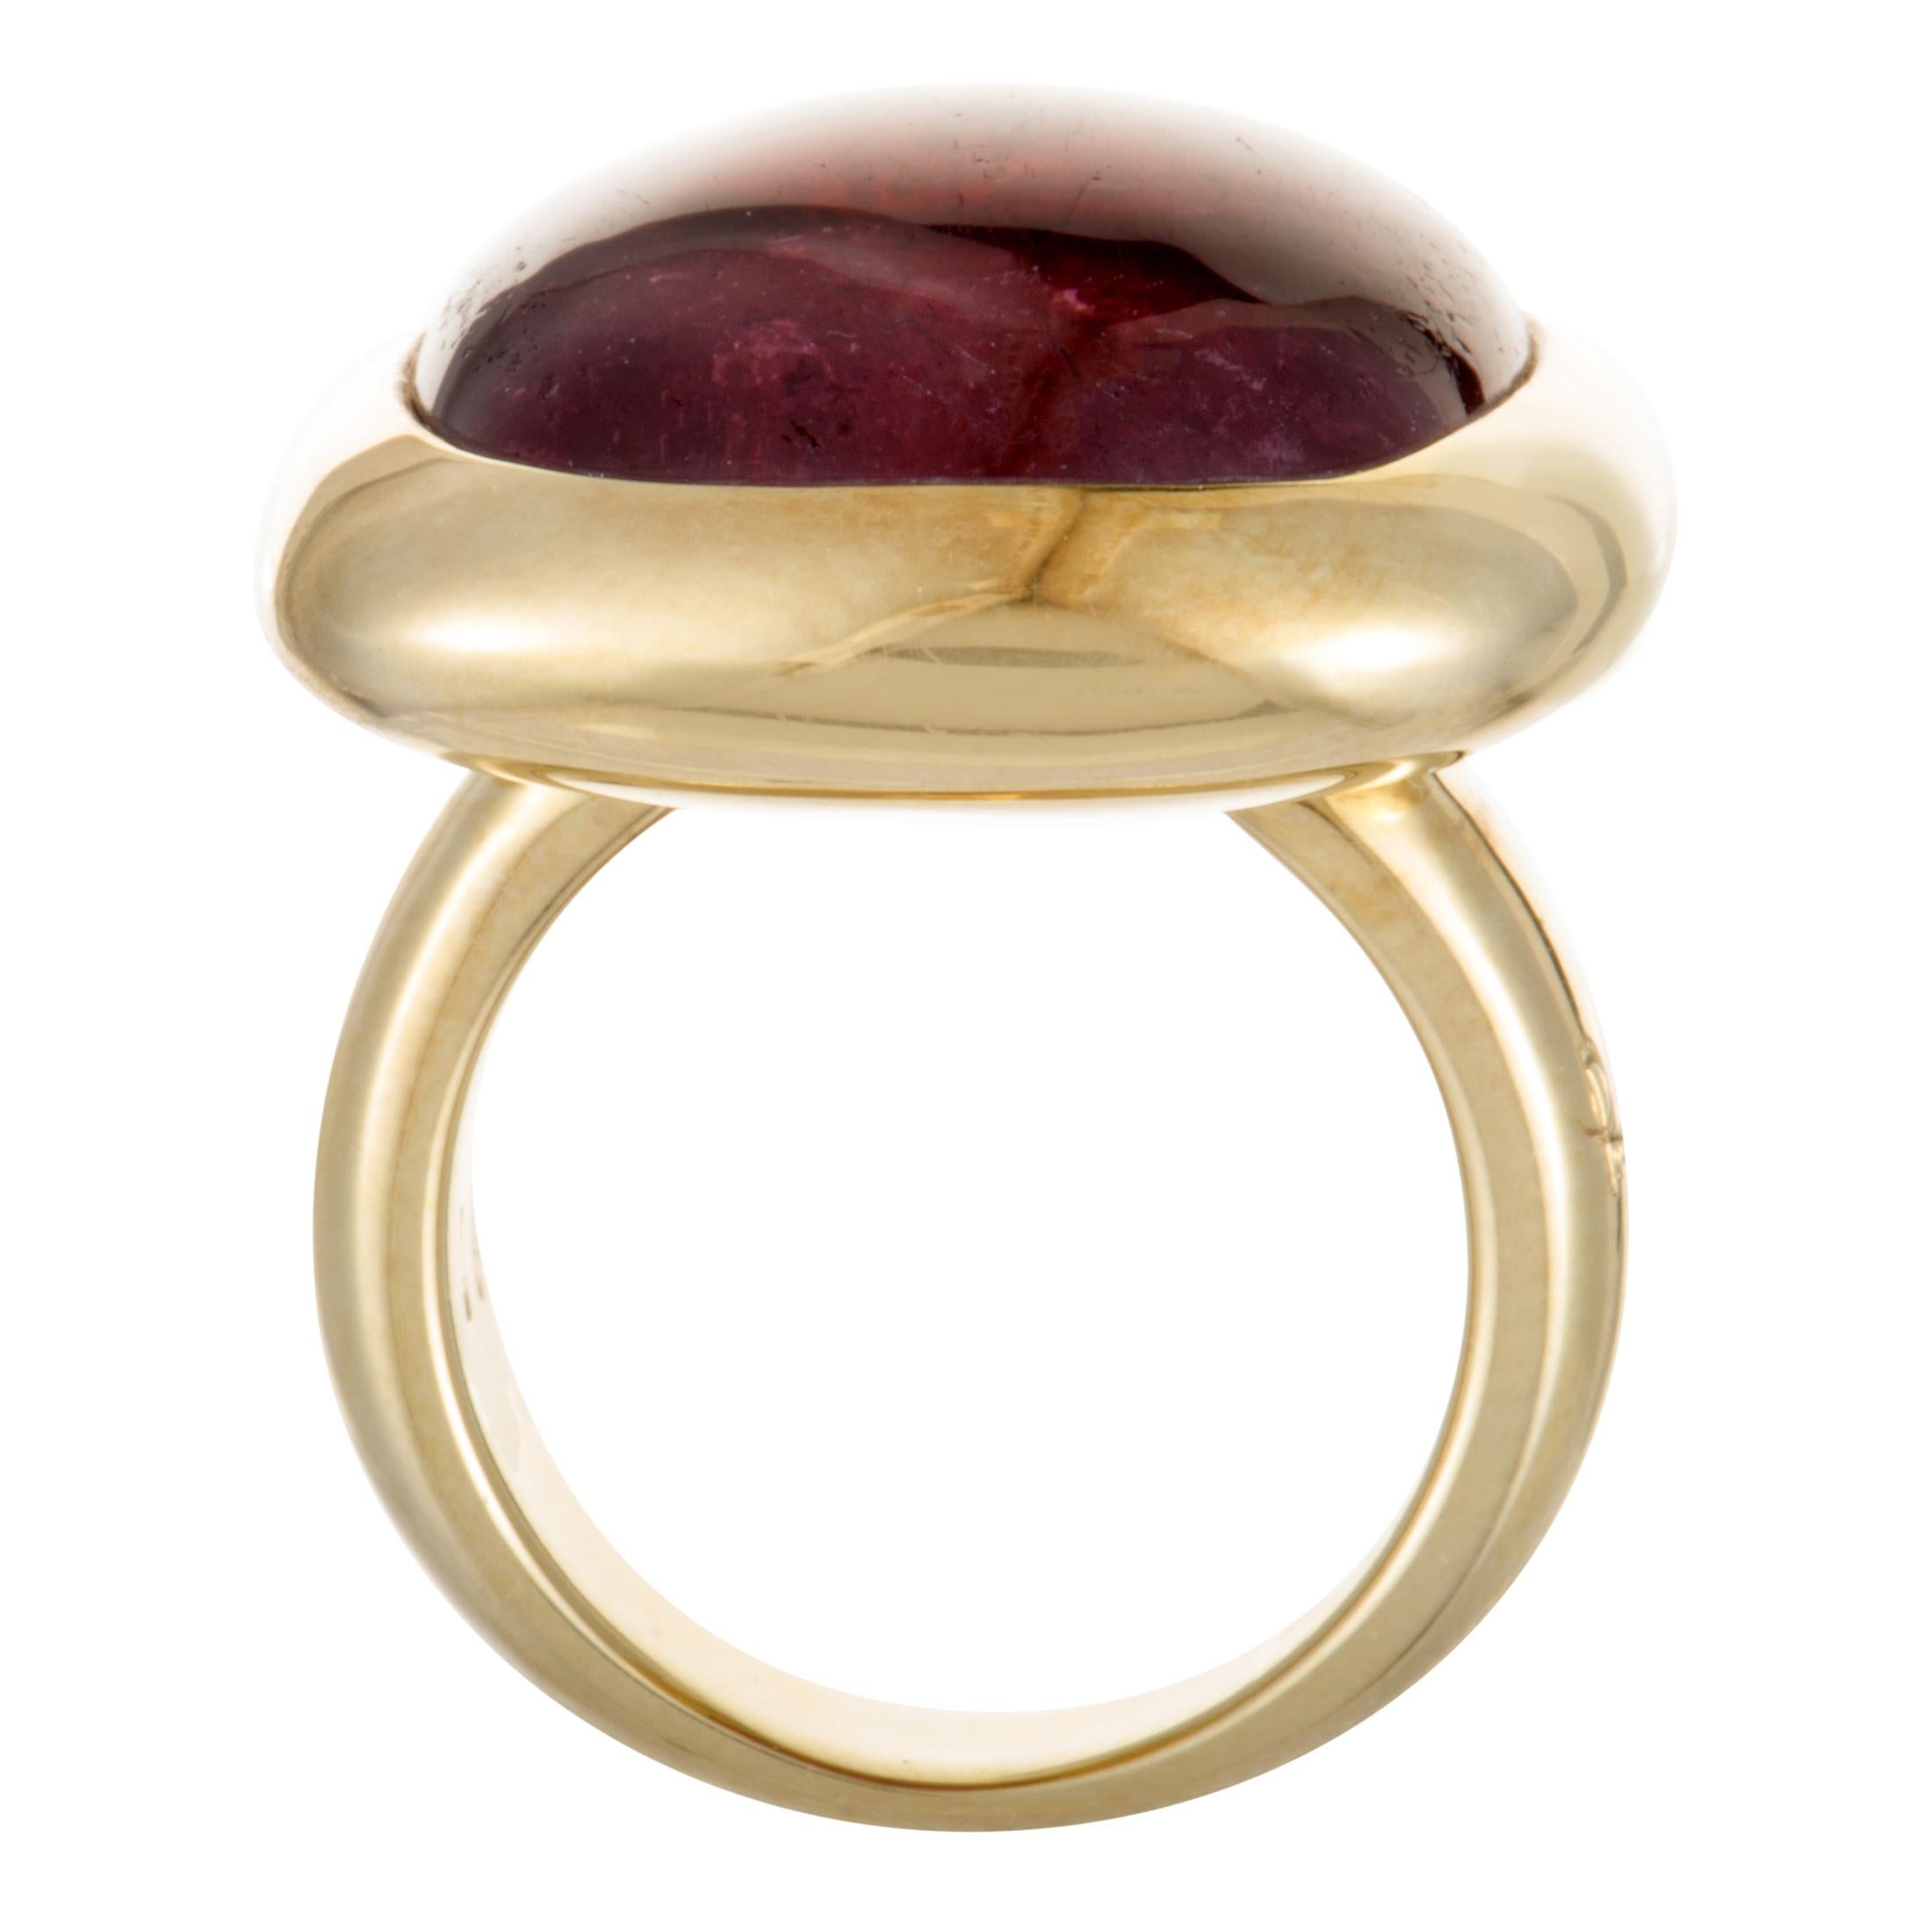 The seductive pink tourmaline lends its irresistible allure to this majestic ring that is designed by Pomellato in a wonderfully prestigious fashion. The ring is crafted from 18K yellow gold and weighs 30 grams.
Ring Top Dimensions: 28mm x 23mm